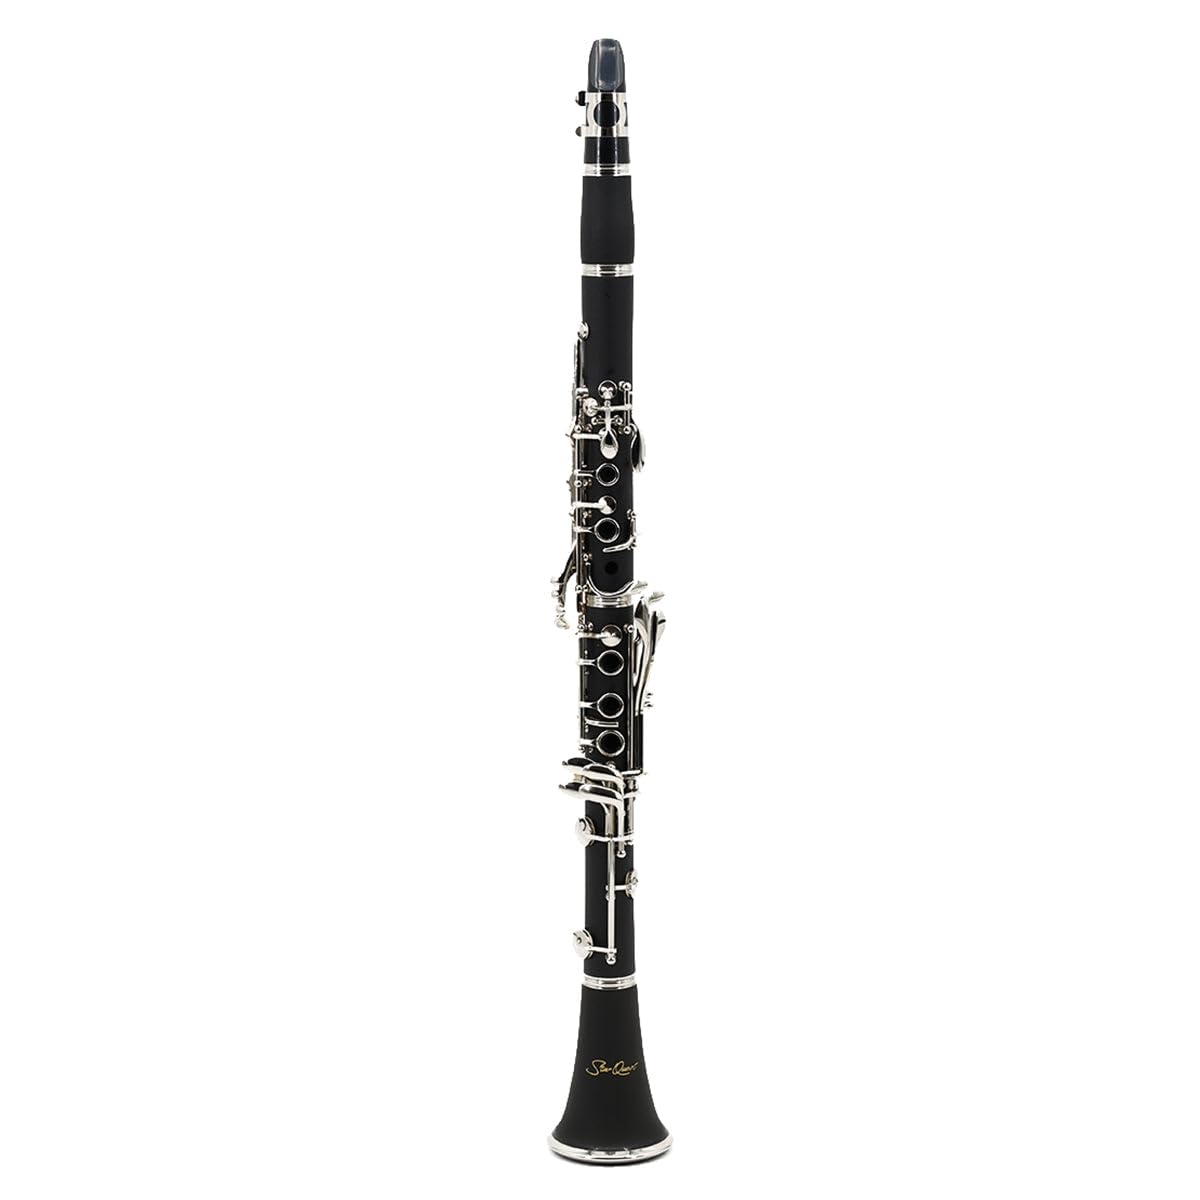 StarQuest SQ-CL250 Clarinet - Durable ABS Body with Gleaming Nickel-Plated Keys, Ideal for Beginners to Experienced Musicians, Hardened Case and Reed Included